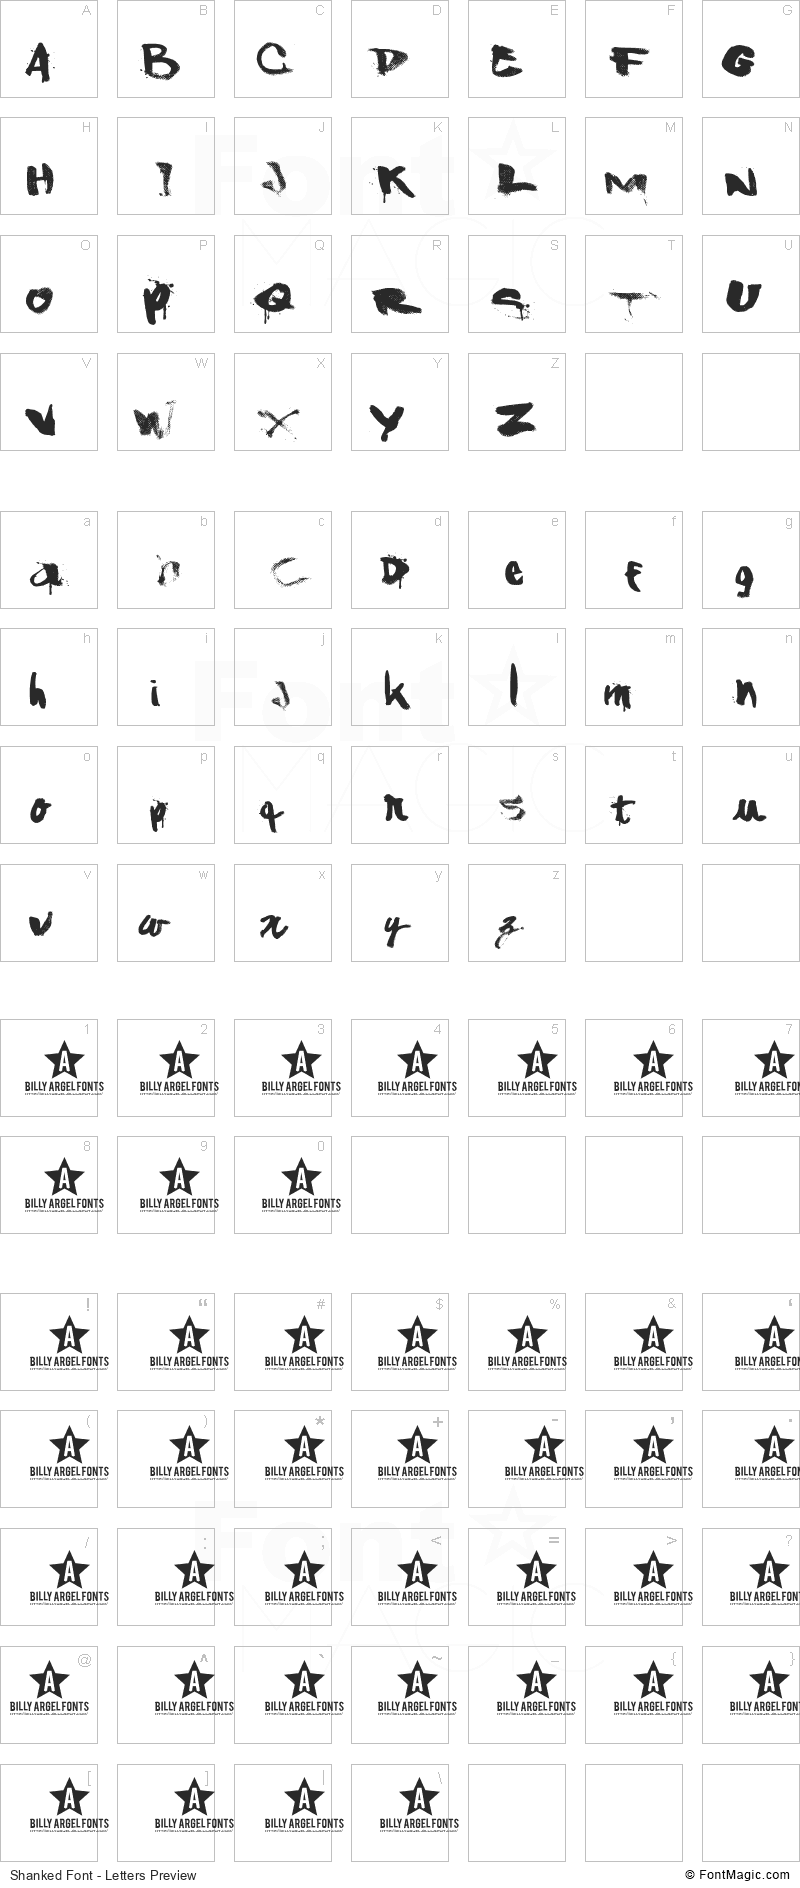 Shanked Font - All Latters Preview Chart